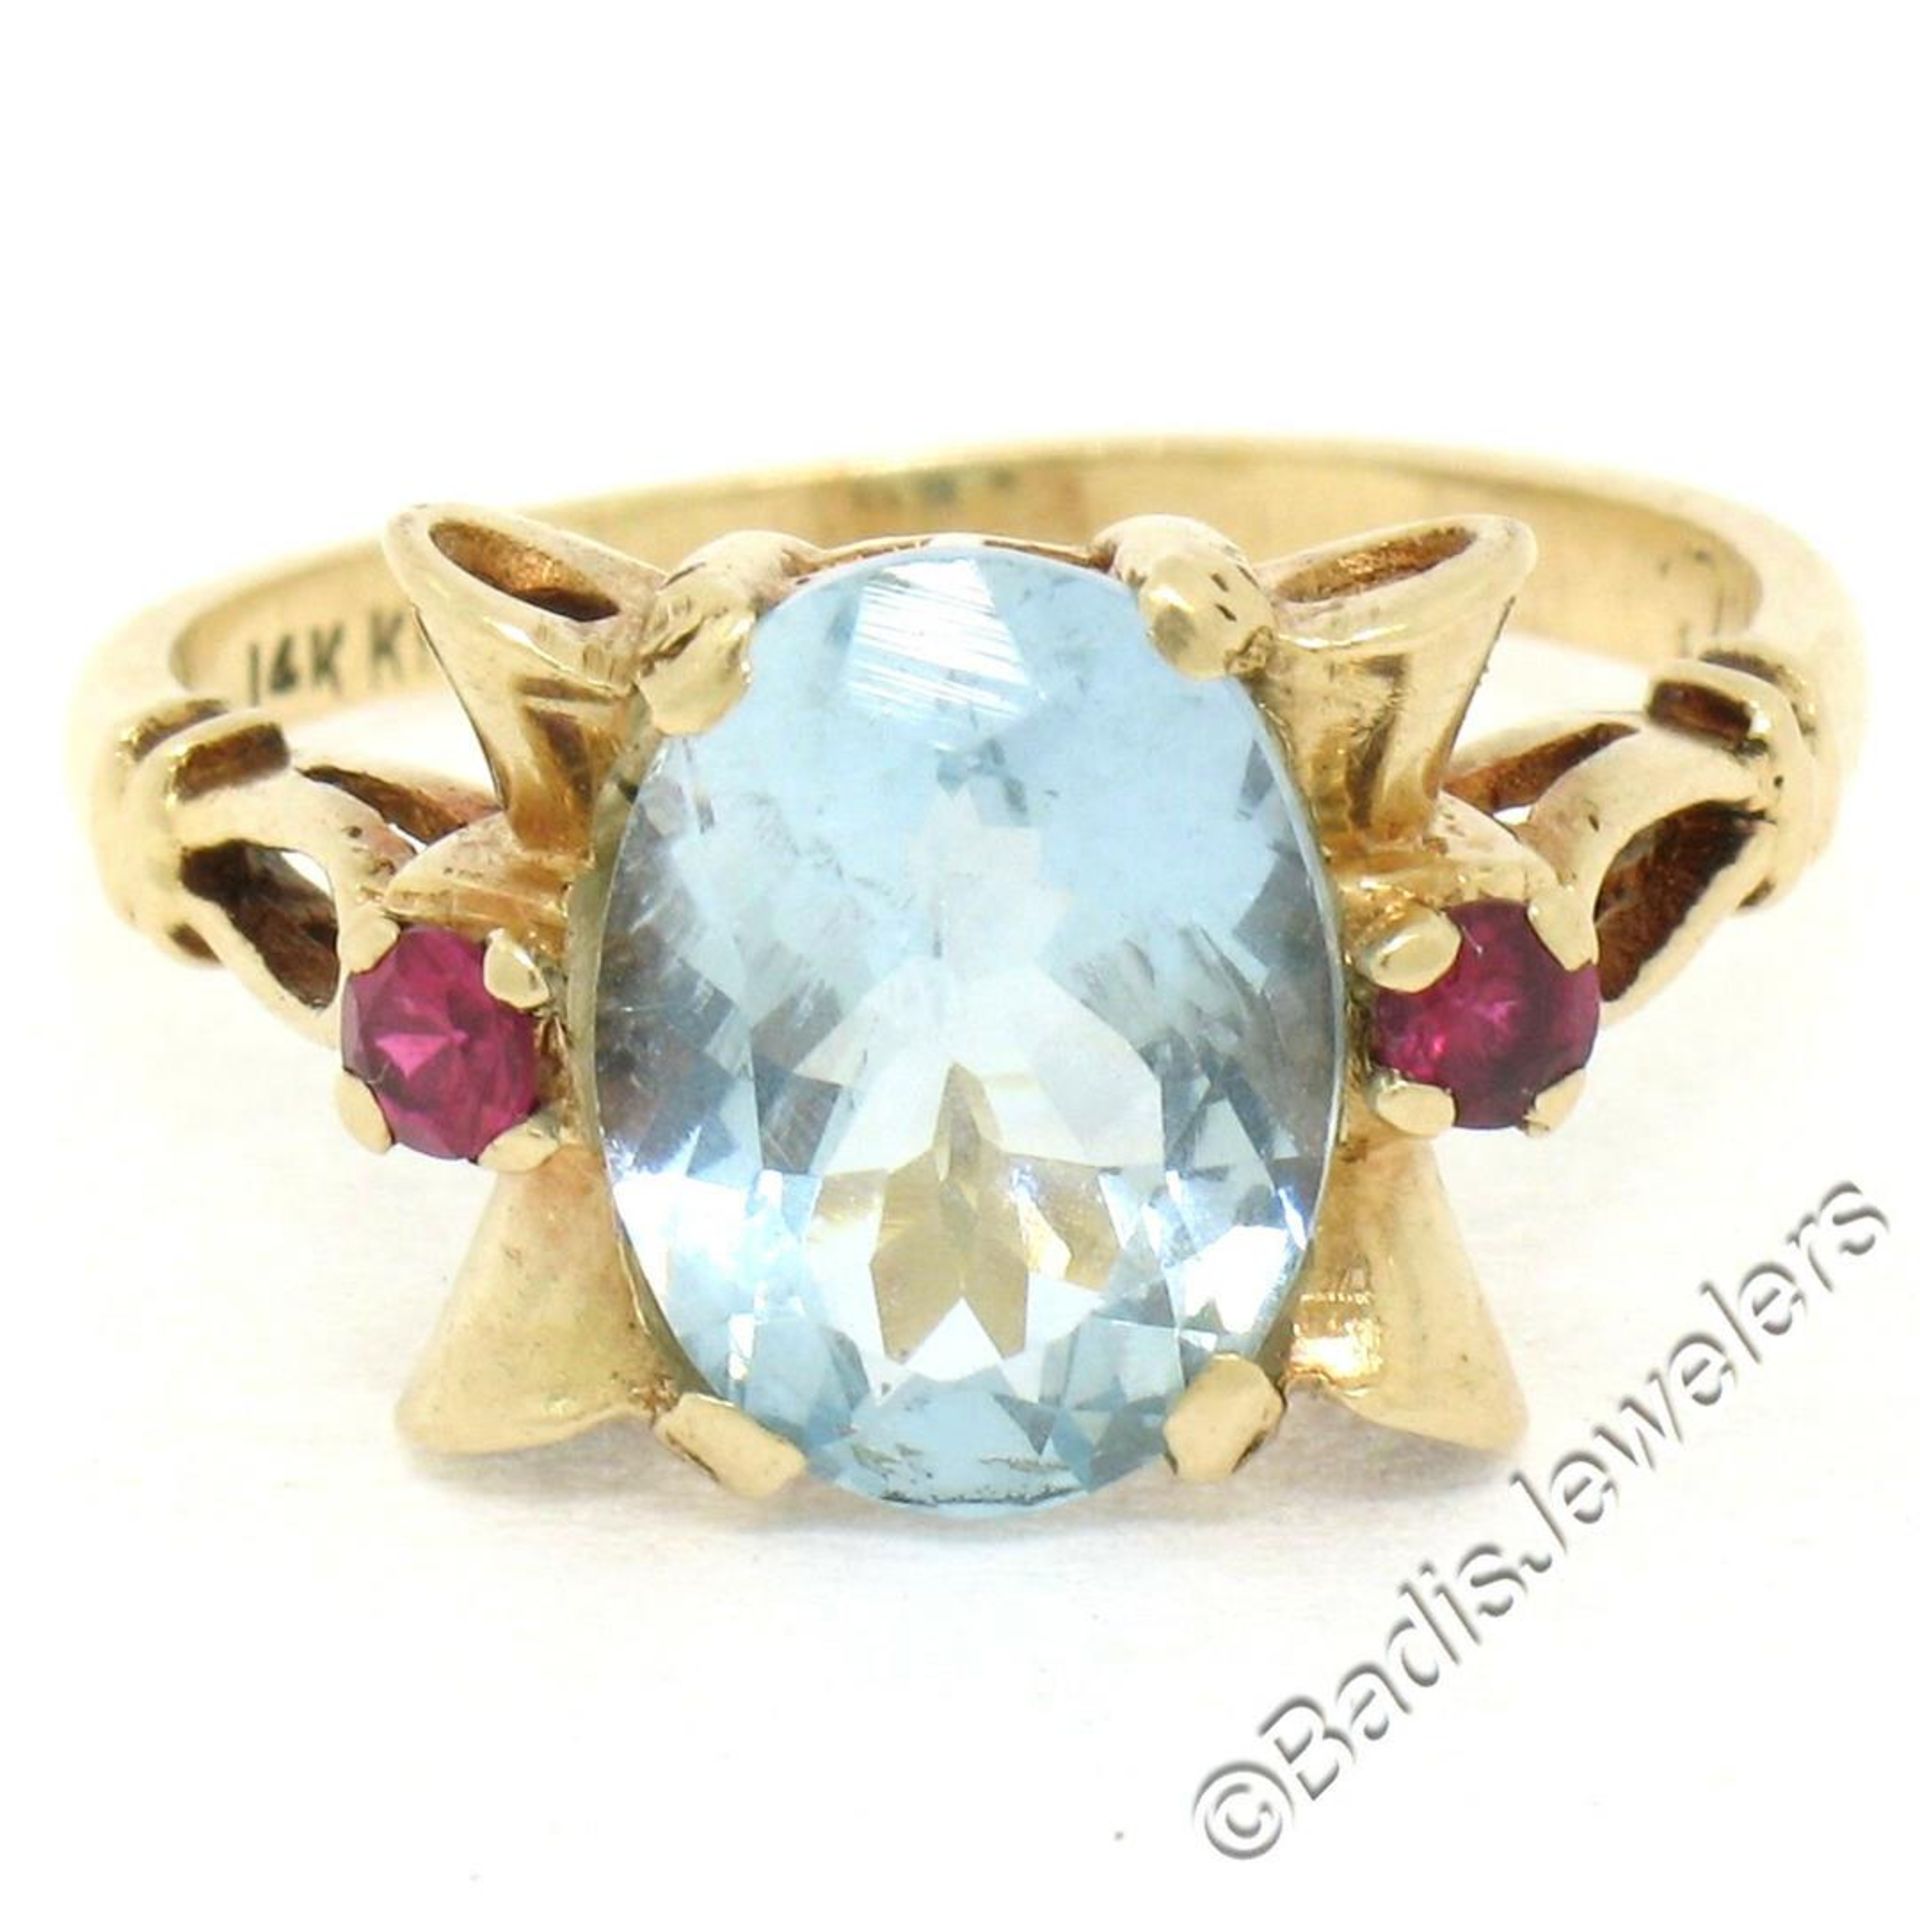 Retro 14kt Yellow Gold 2.18 ctw Aquamarine Solitaire and Synthetic Ruby Ring - Image 4 of 9